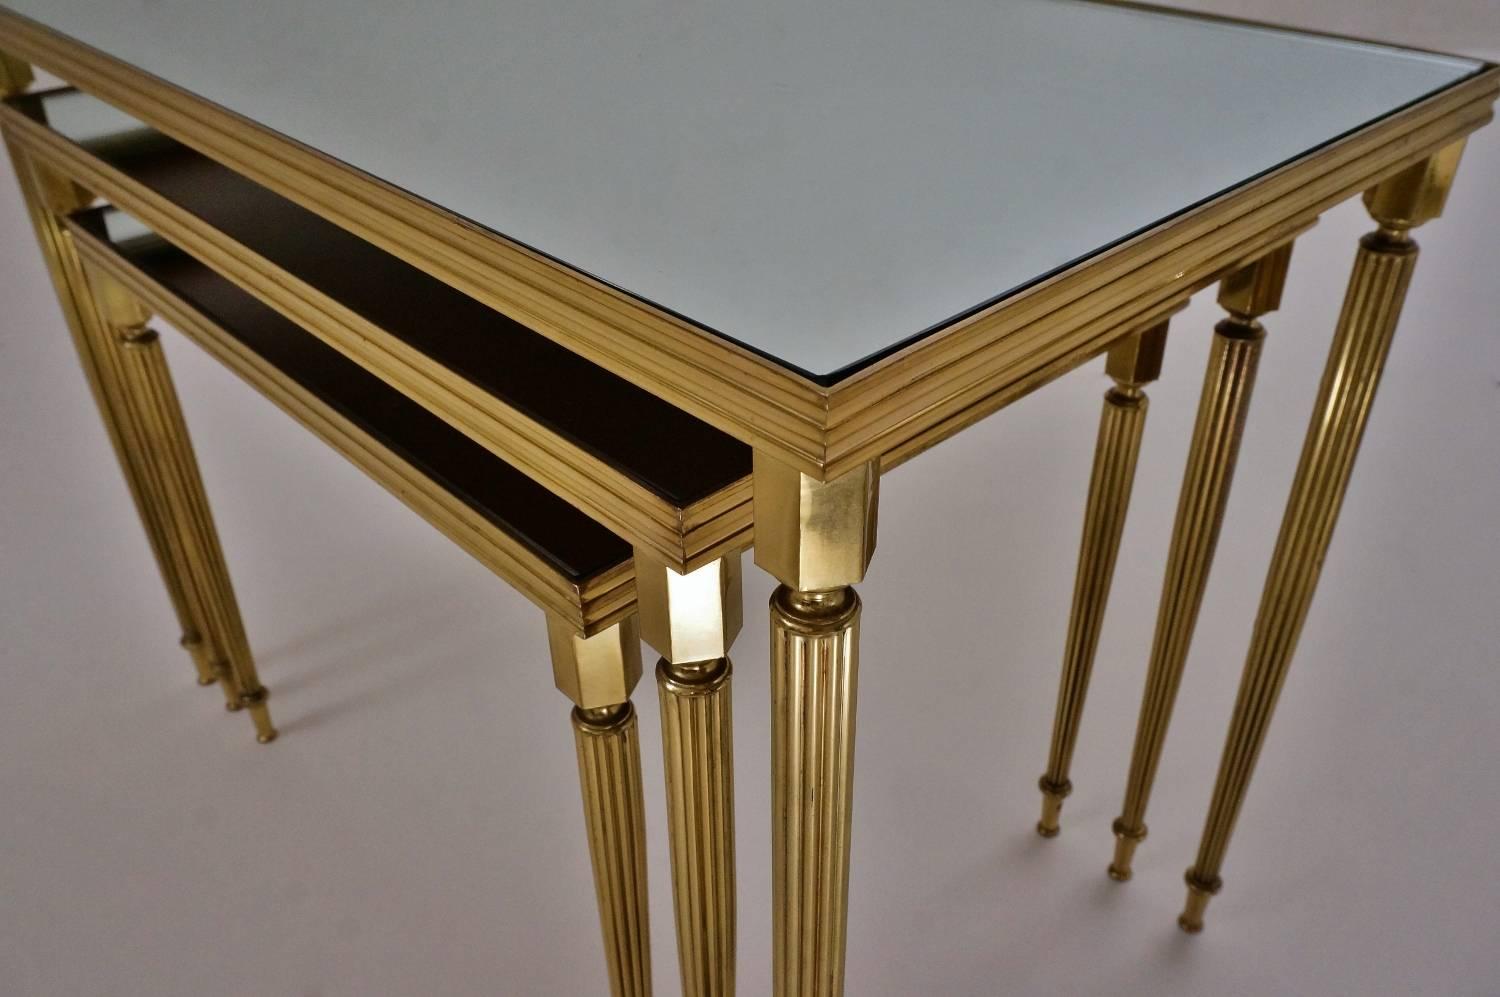 Hollywood Regency Maison Baguès Nesting Tables, Brass and Mirror, 1969, French